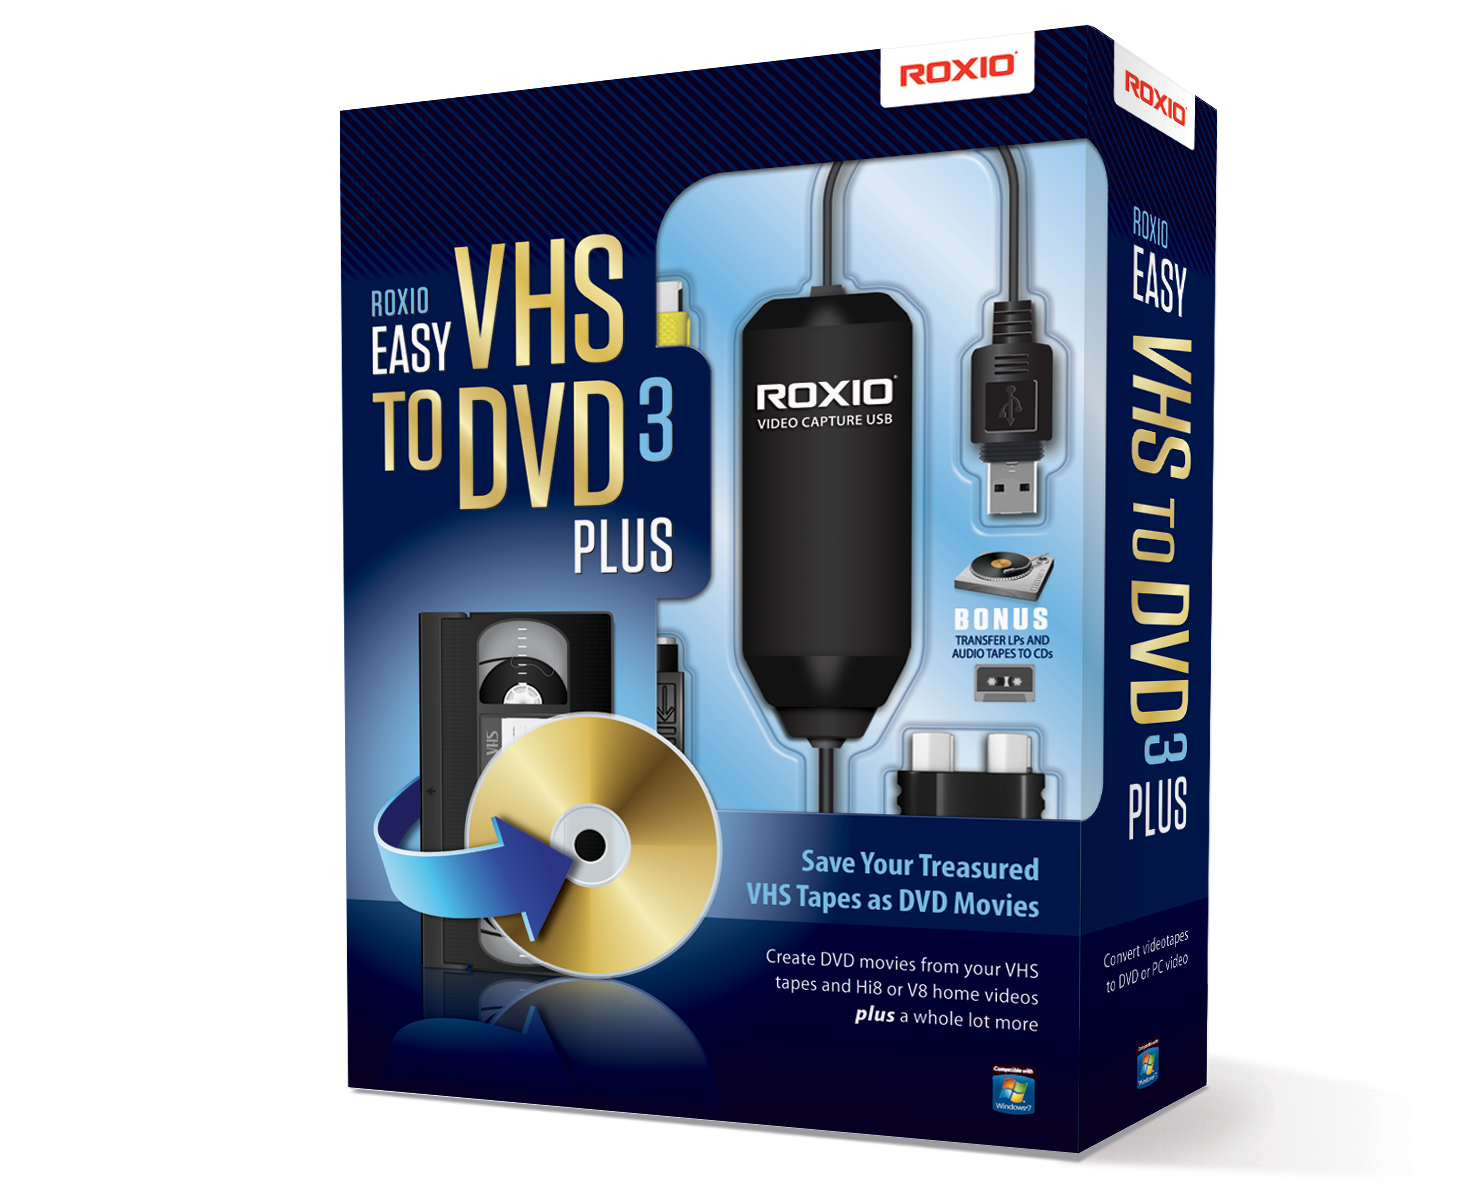 download roxio easy vhs to dvd plus manual